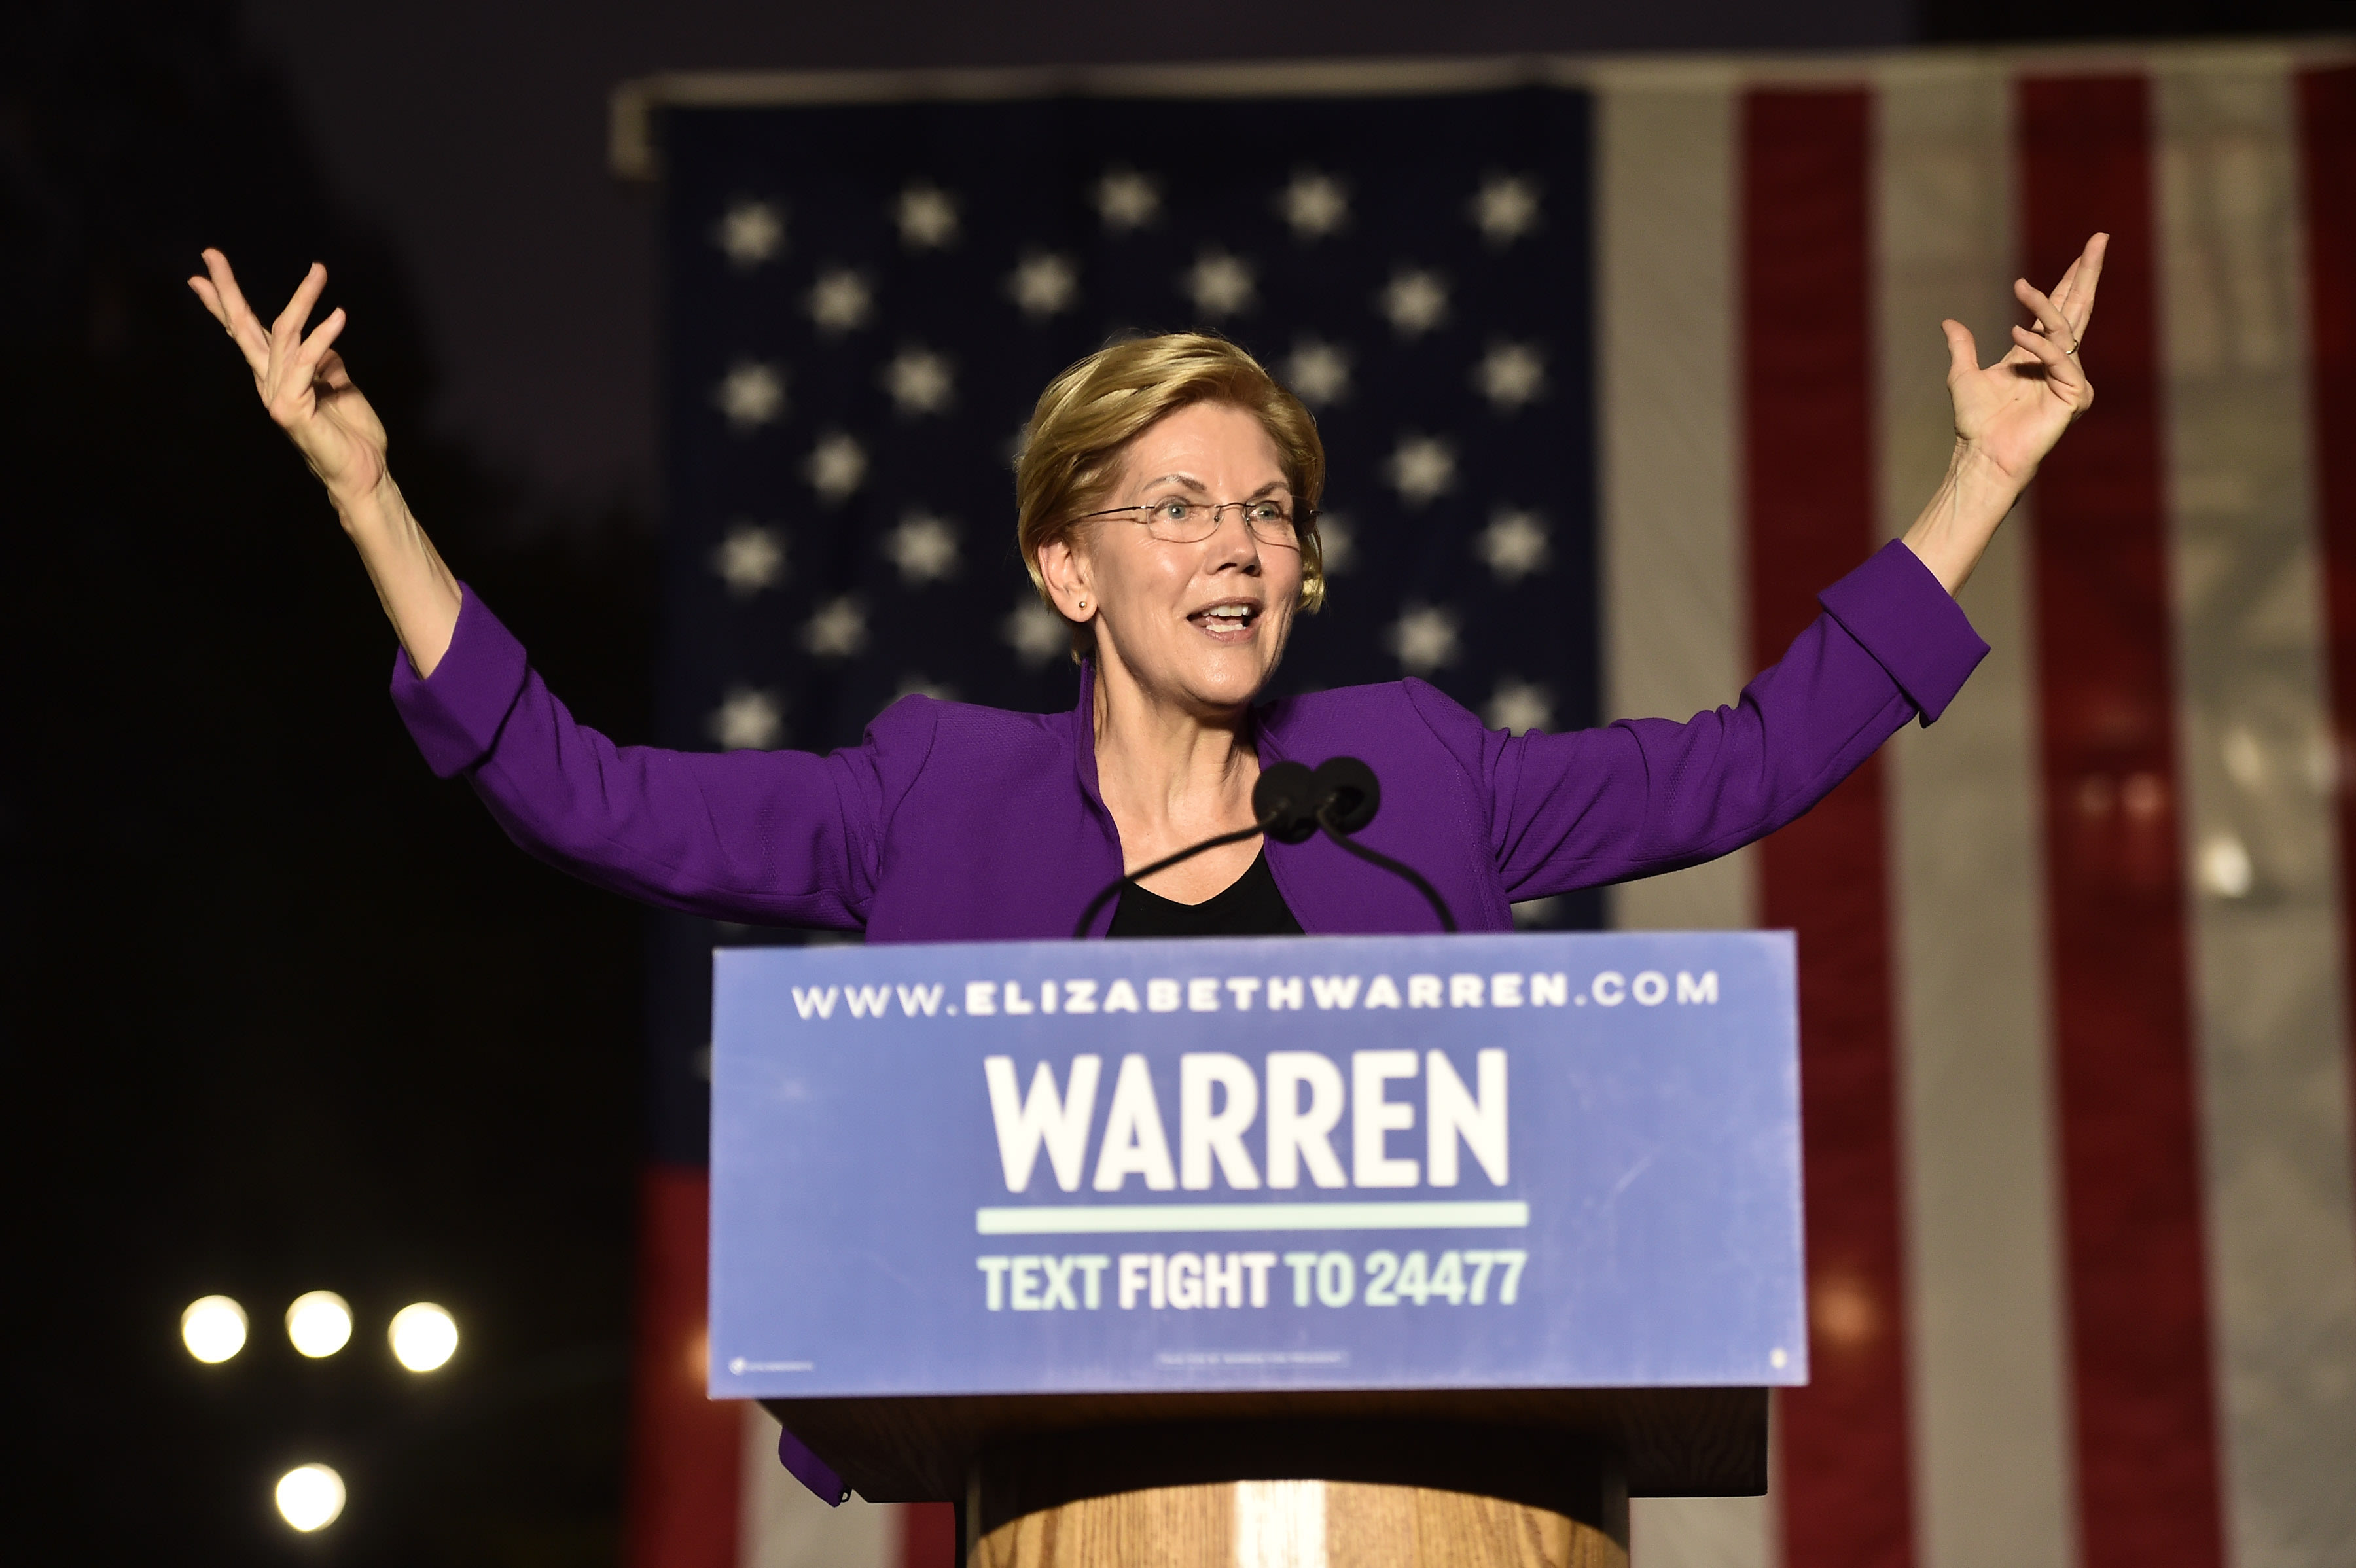 Elizabeth Warren presidency might not be that dangerous for shares and markets